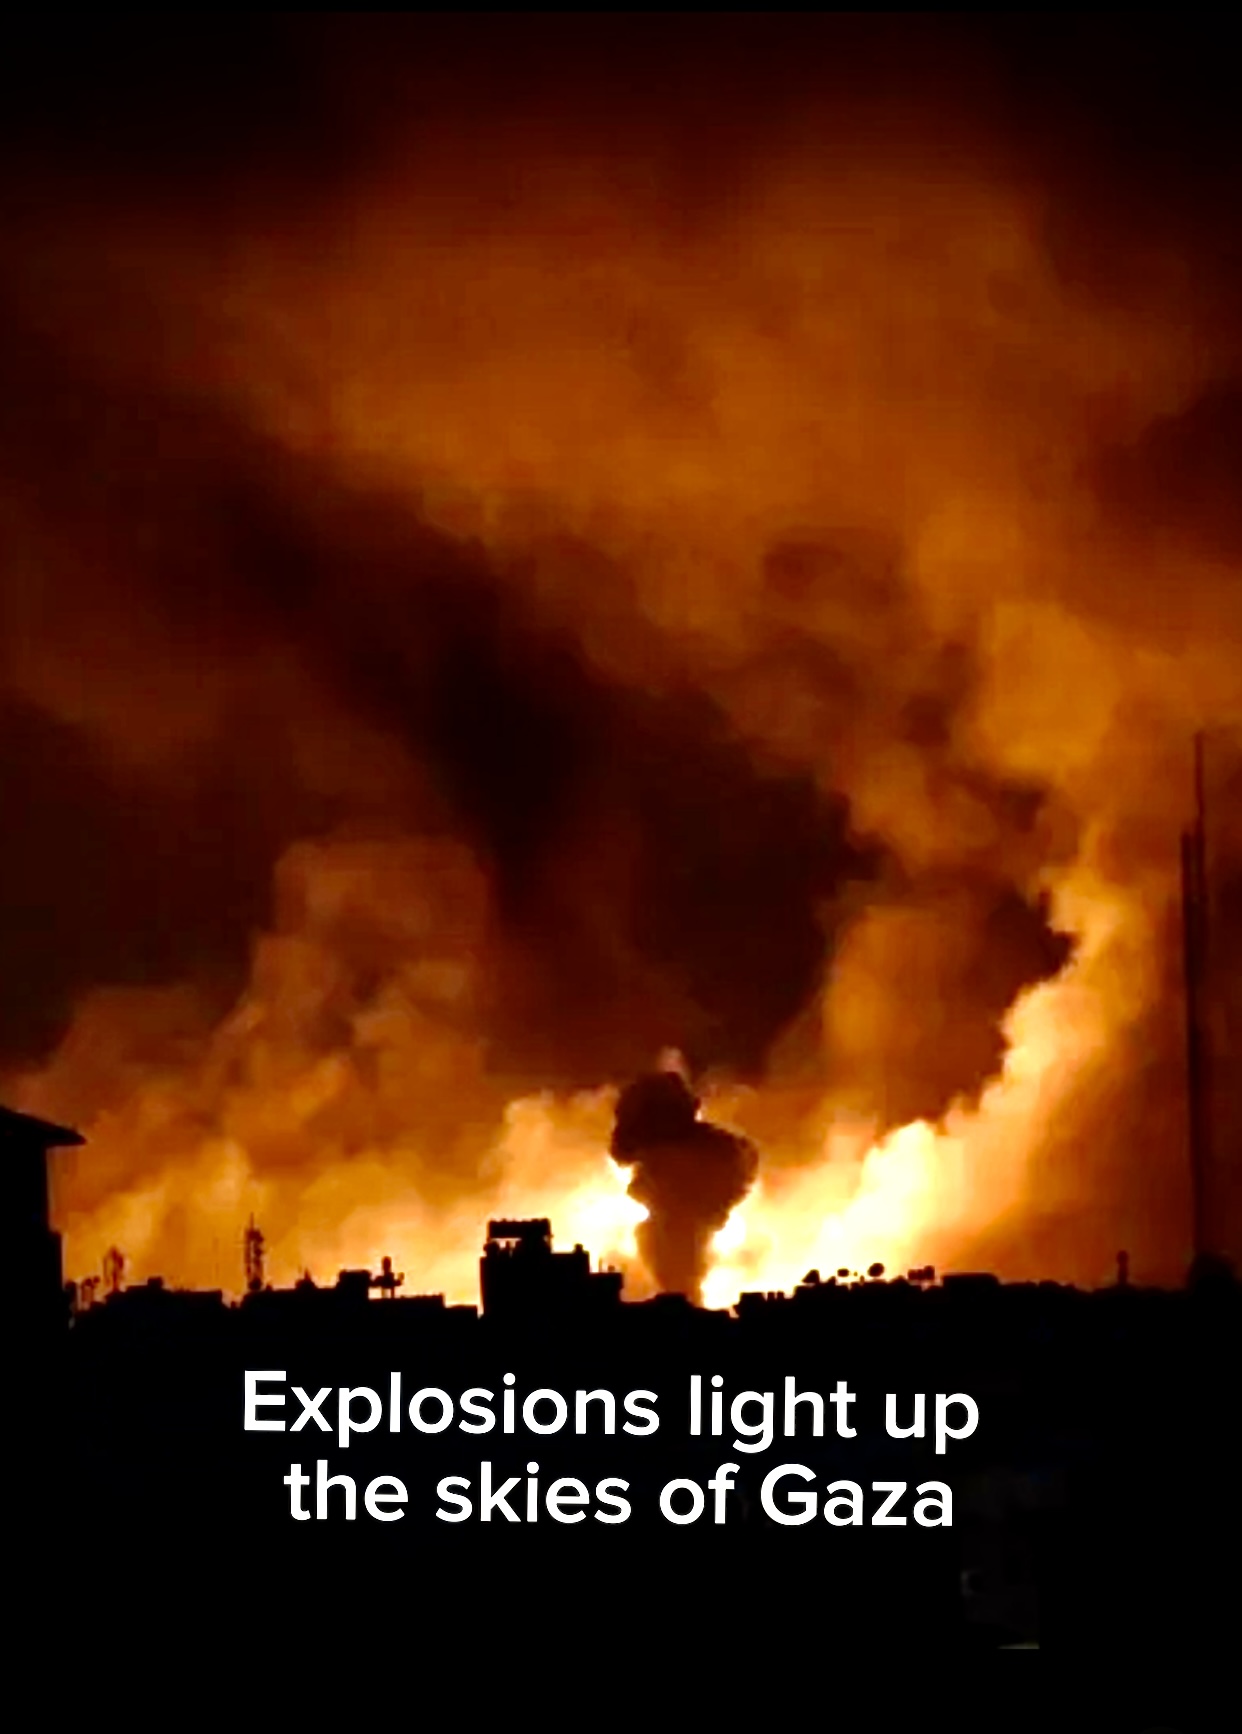 Explosions light up
the skies of Gaza